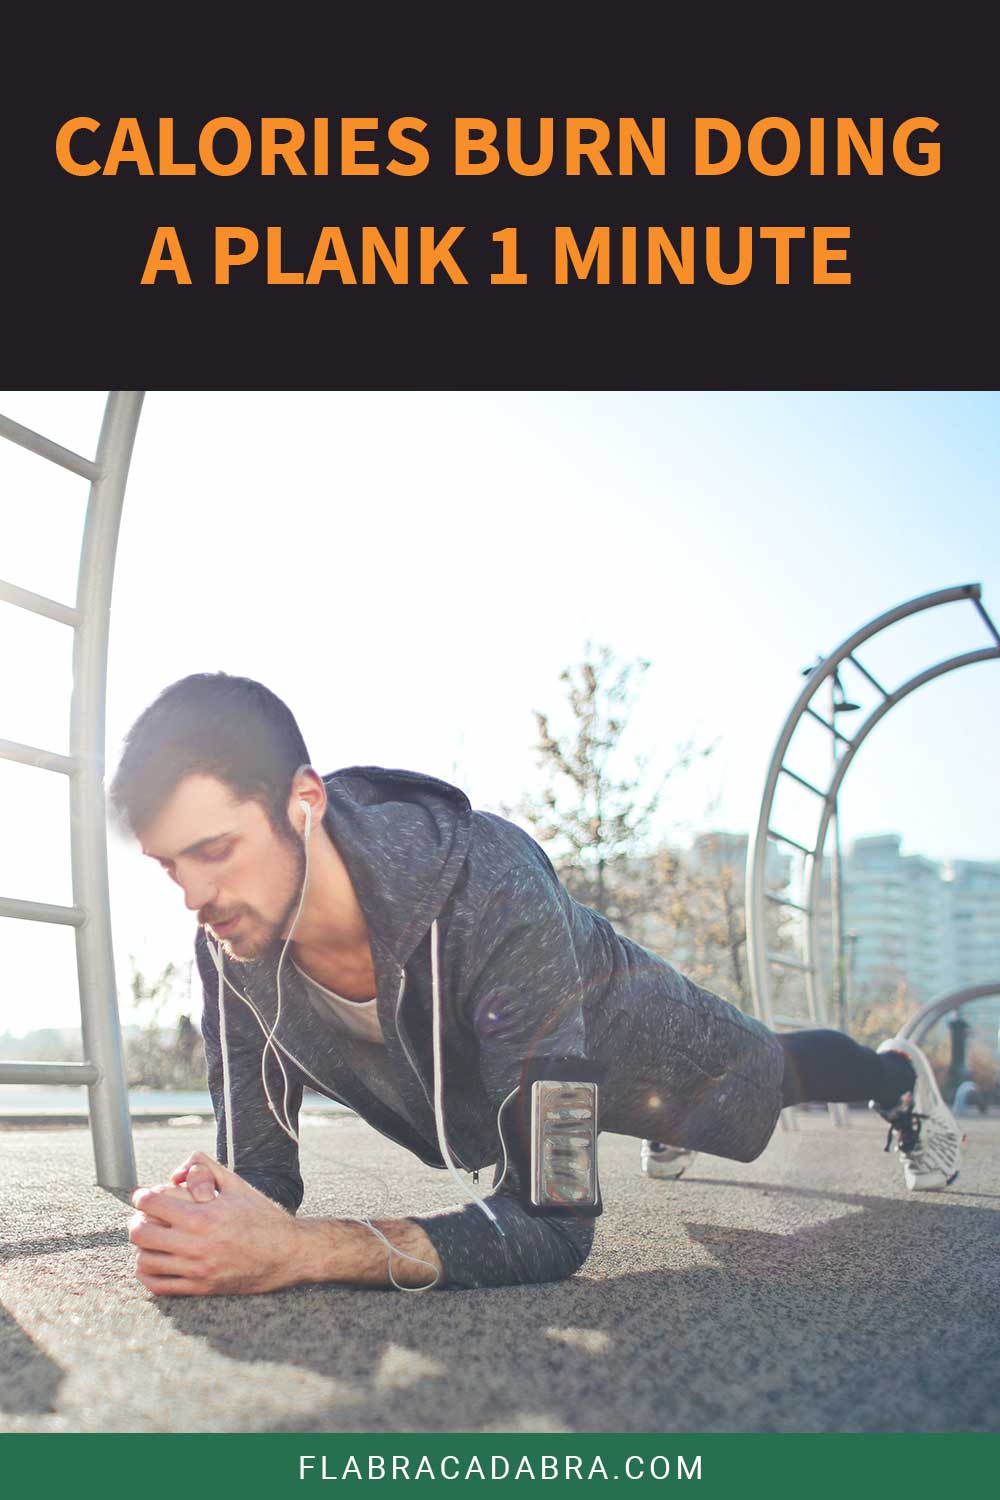 Man in grey hoodie and shorts doing a plank on concrete outside - Calories burn doing a it in 1 minute.